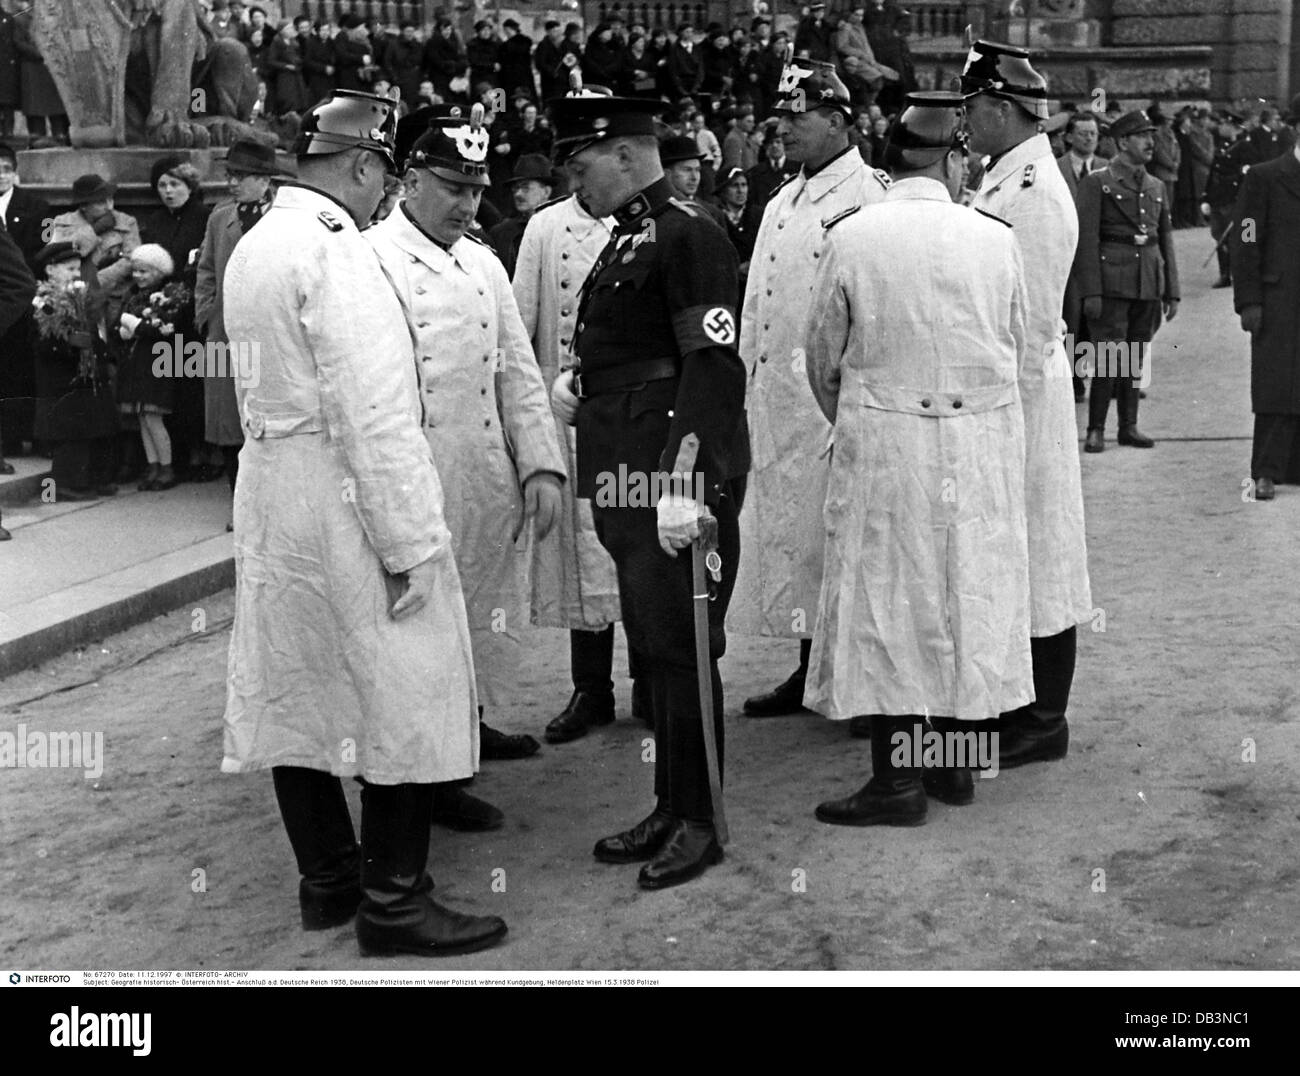 Nazism / National Socialism, politics, annexation of Austria 1938, German and Austrian Policemen, Heldenplatz, Vienna, 15.3.1938,  Nazi Germany, Third Reich, Anschluss, occupation, police, square, 20th century, historic, historical, people, 1930s, Additional-Rights-Clearences-Not Available Stock Photo